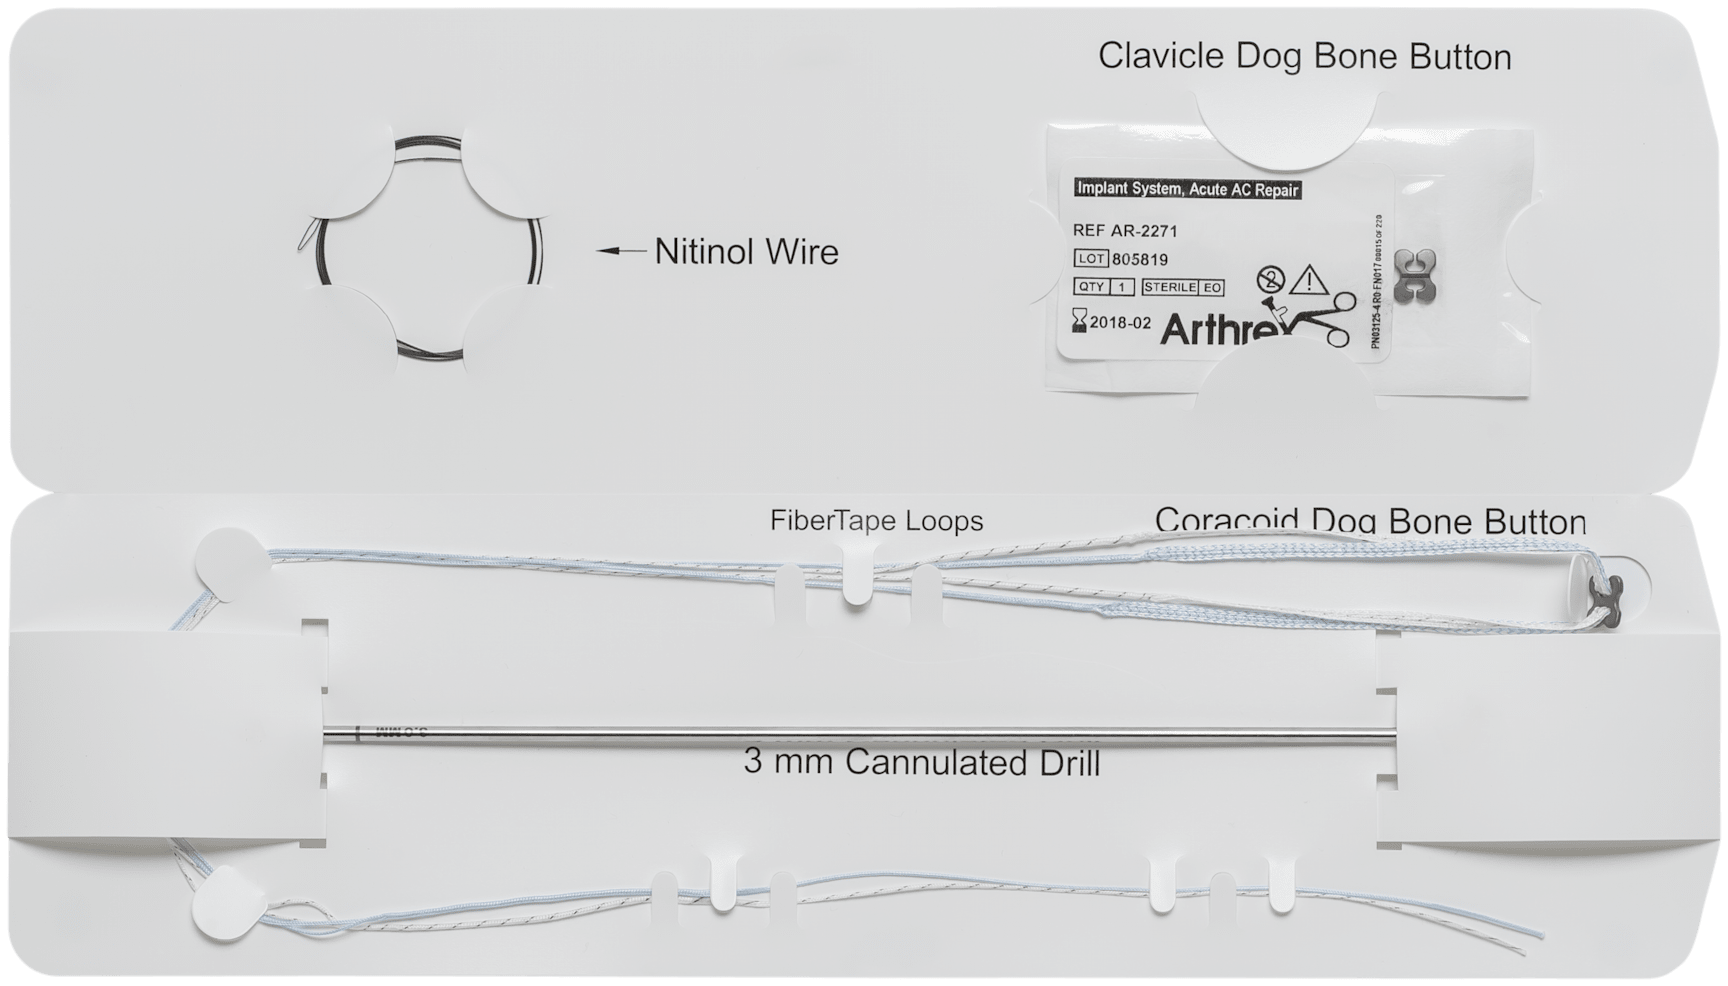 Acute AC Repair Implant System Includes Dog Bone Button Preloaded on FiberTape and TigerTape Loops, Free Dog Bone Button, 3 mm Cannulated Drill, and Nitinol Suture-Passing Wire